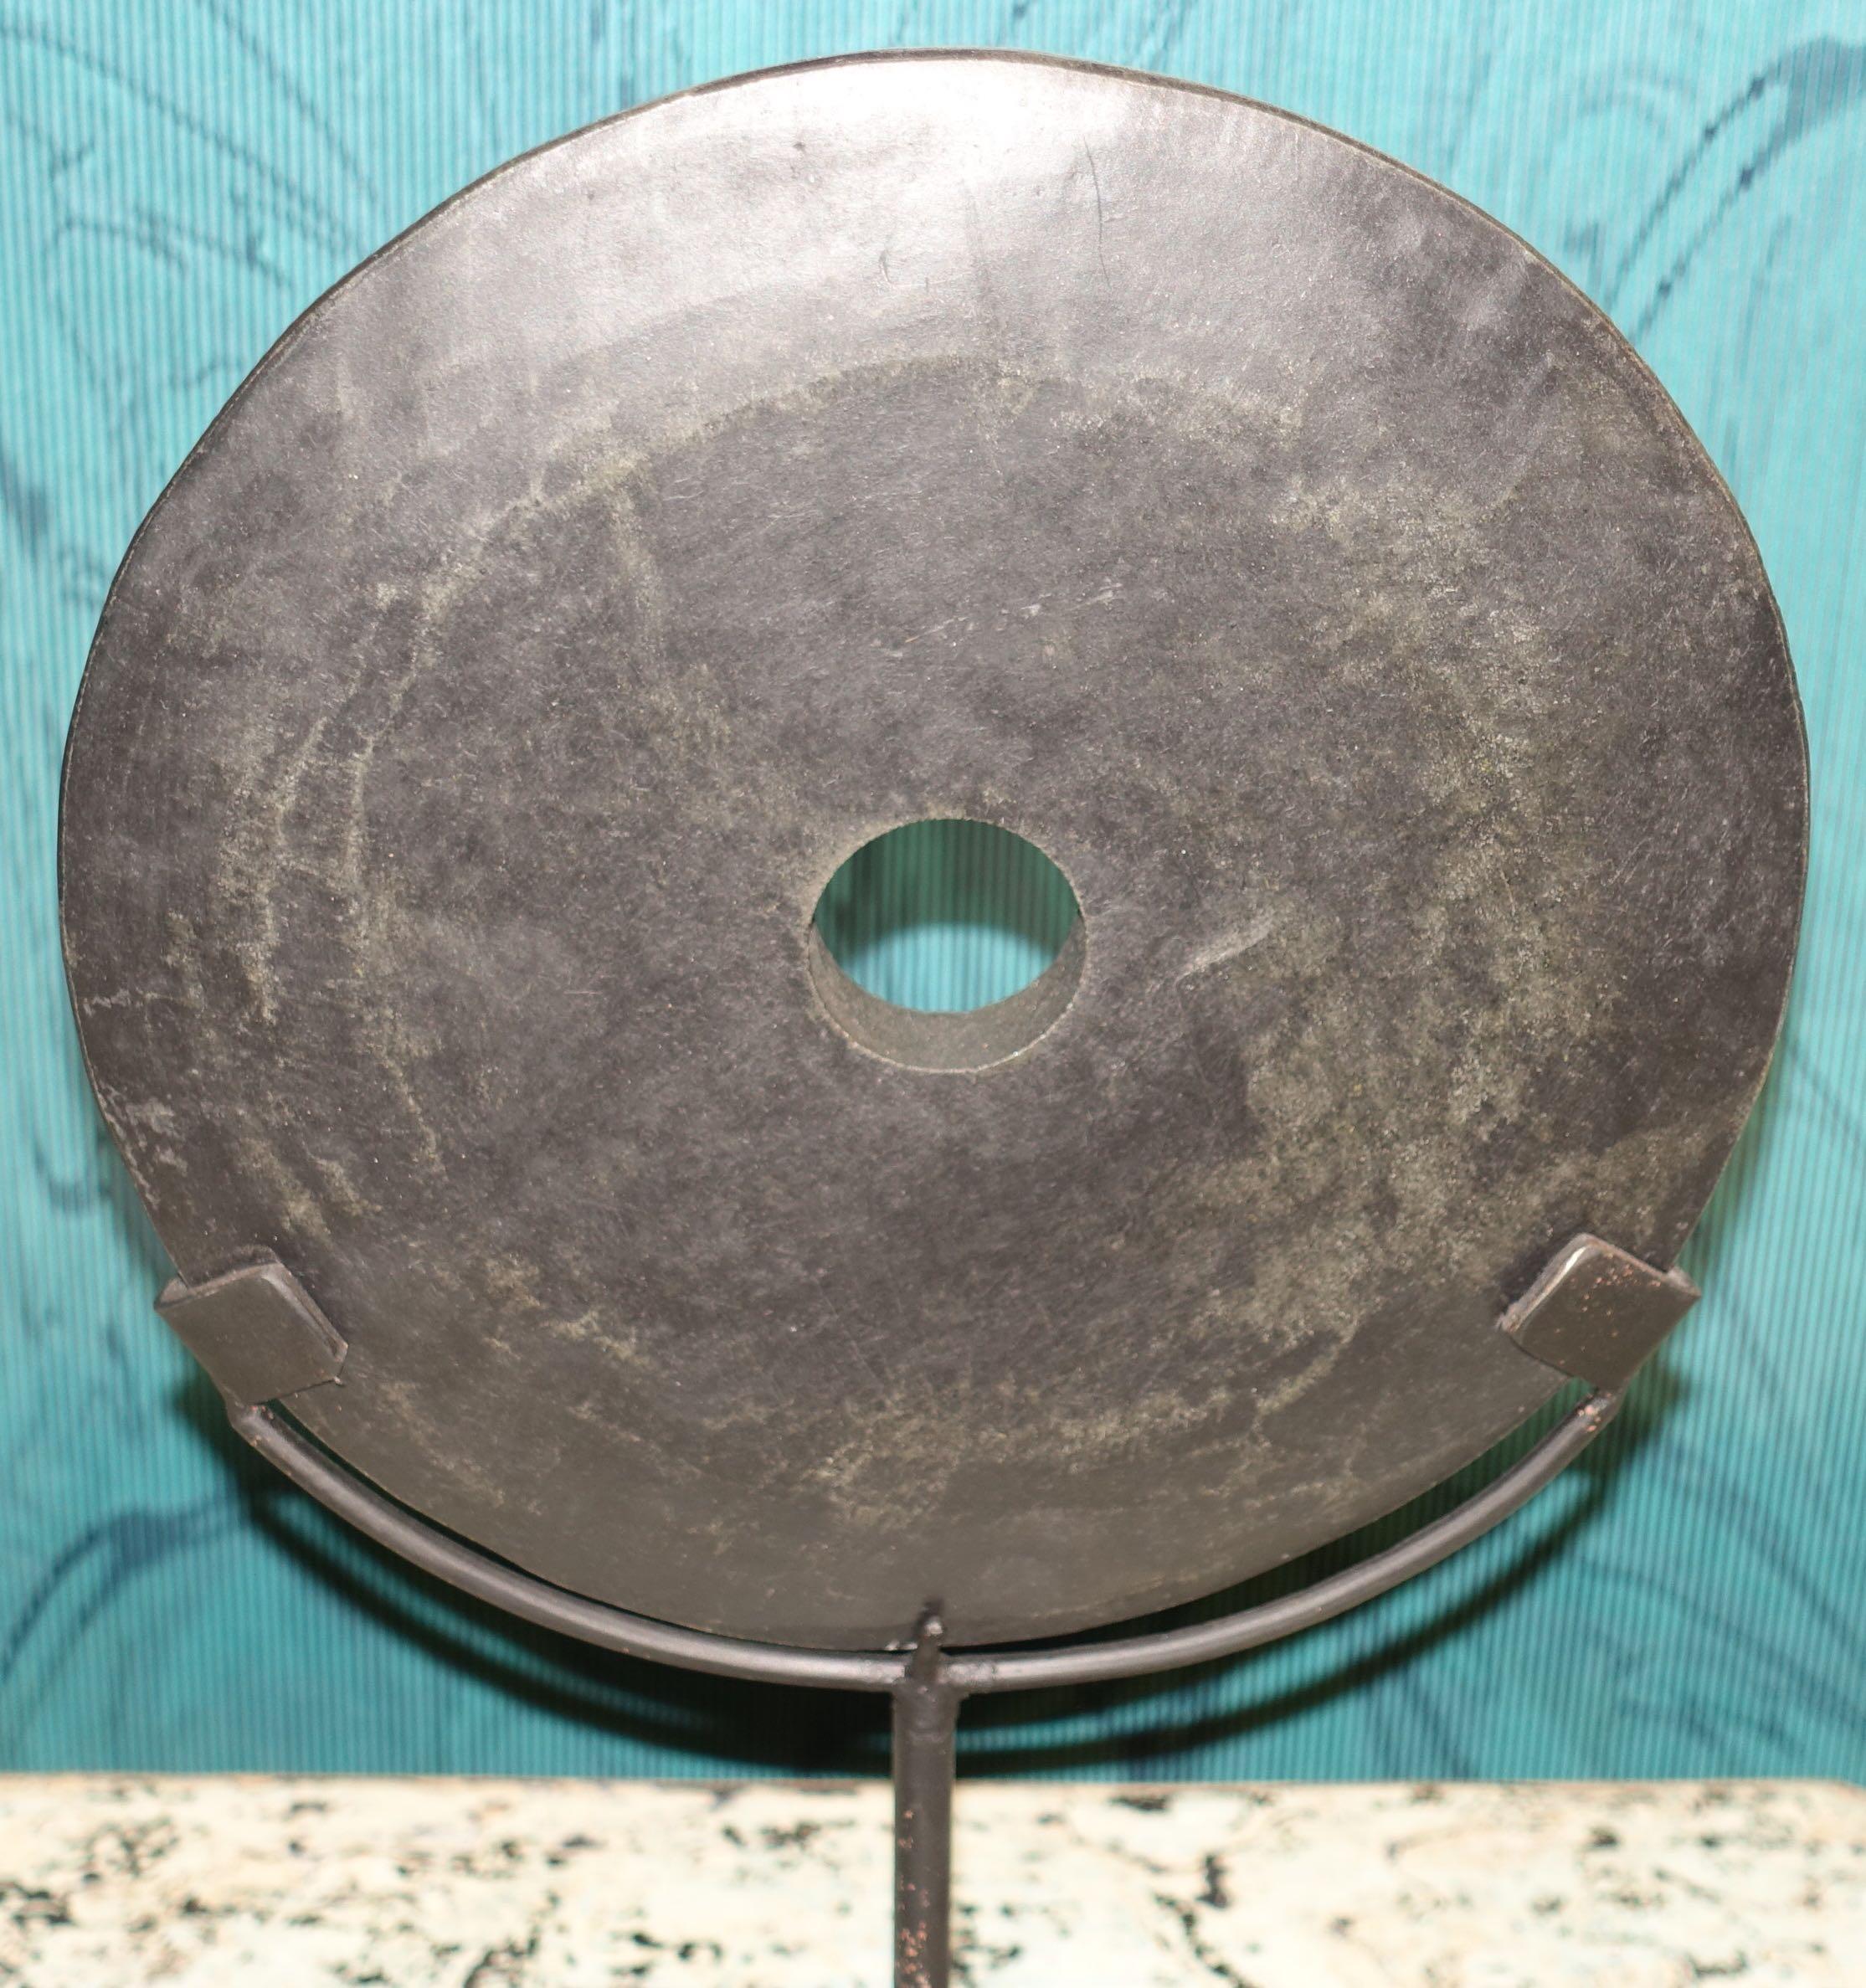 Contemporary Chinese black stone disc sculpture
Stand measures 5